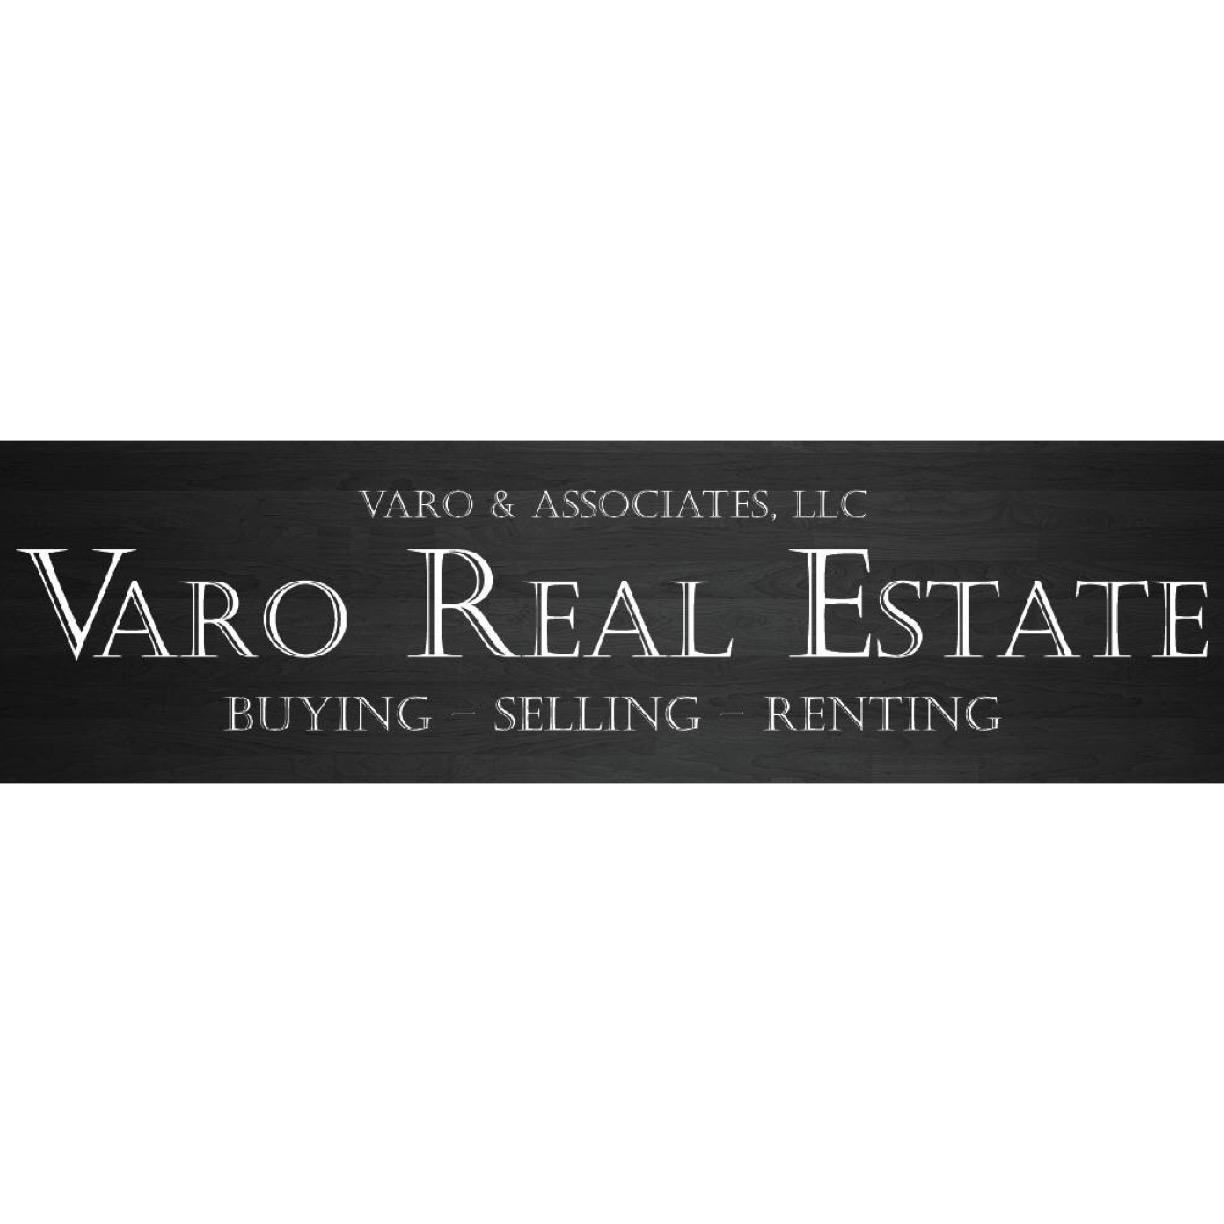 Varo Real Estate is a full service real estate brokerage specializing in residential sale and rentals across Lake, Cook and DuPage Counties in Illinois.